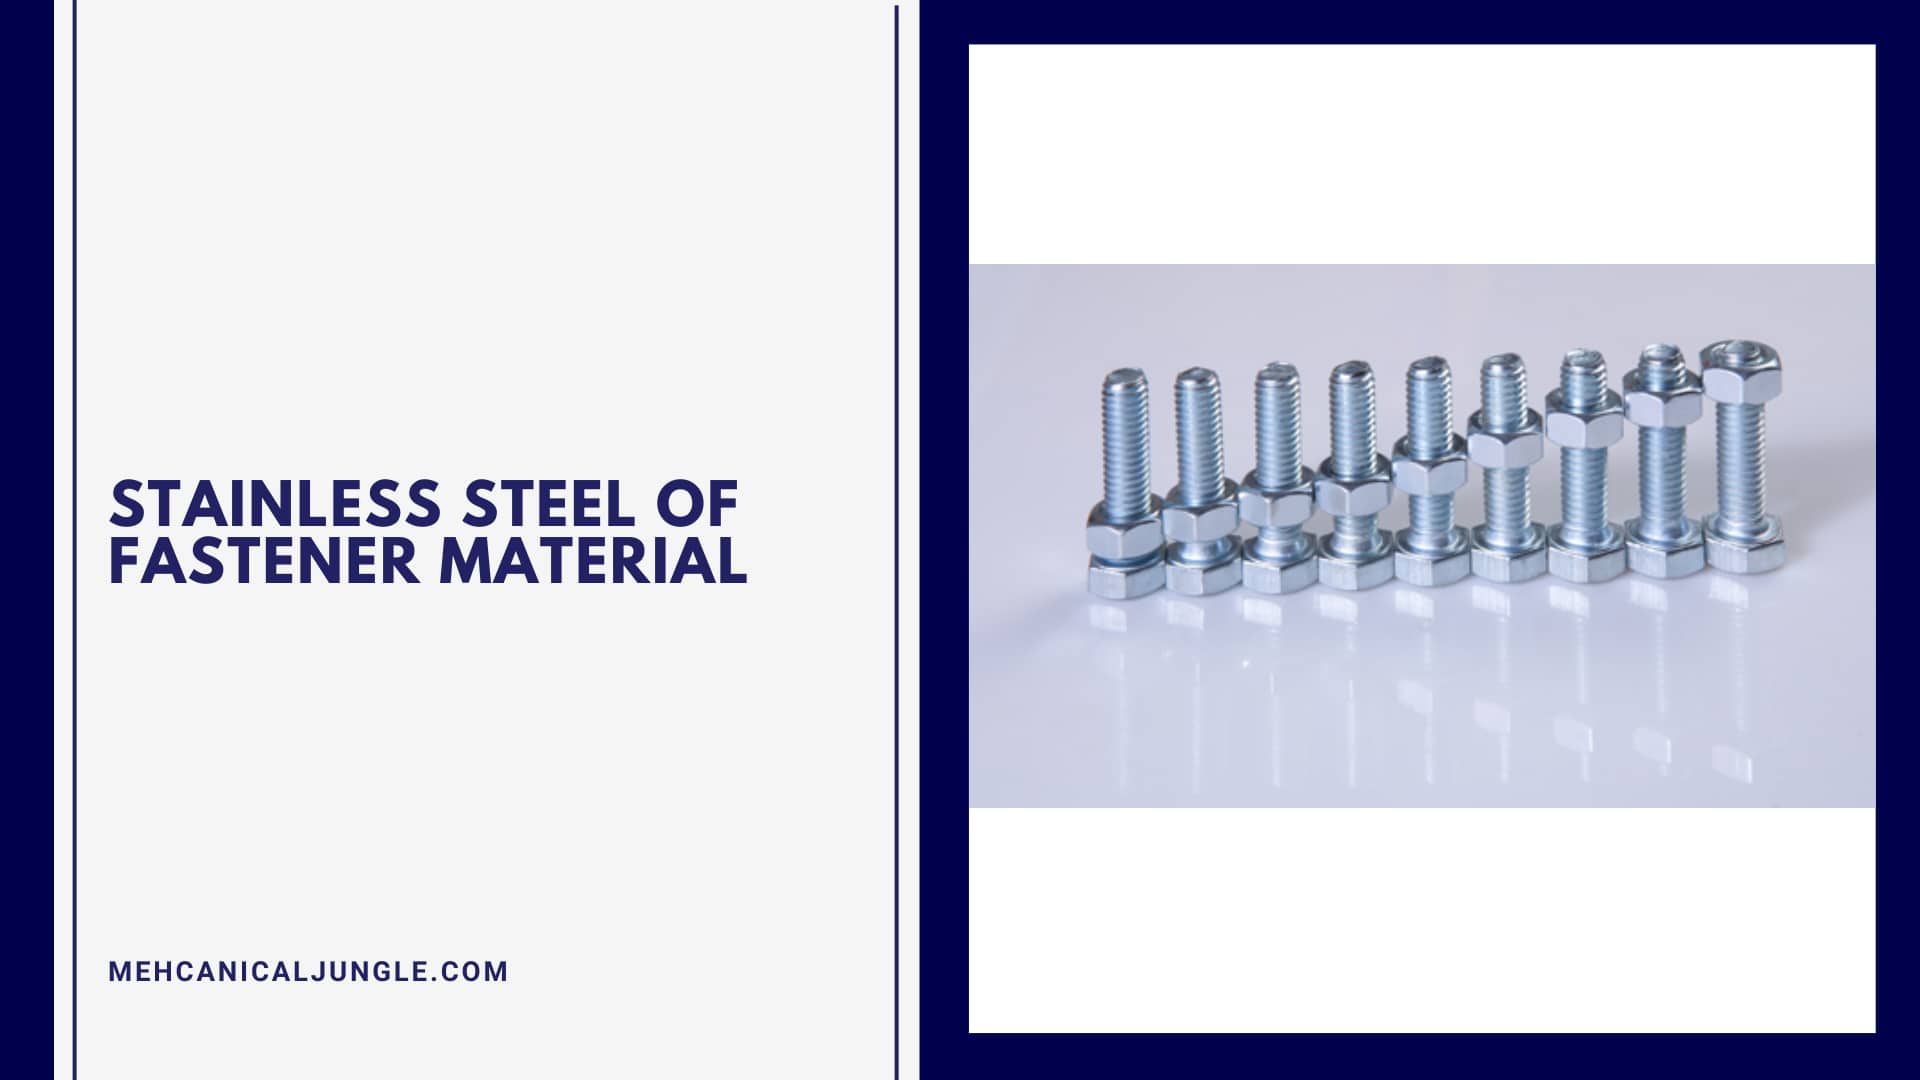 Stainless Steel of Fastener Material